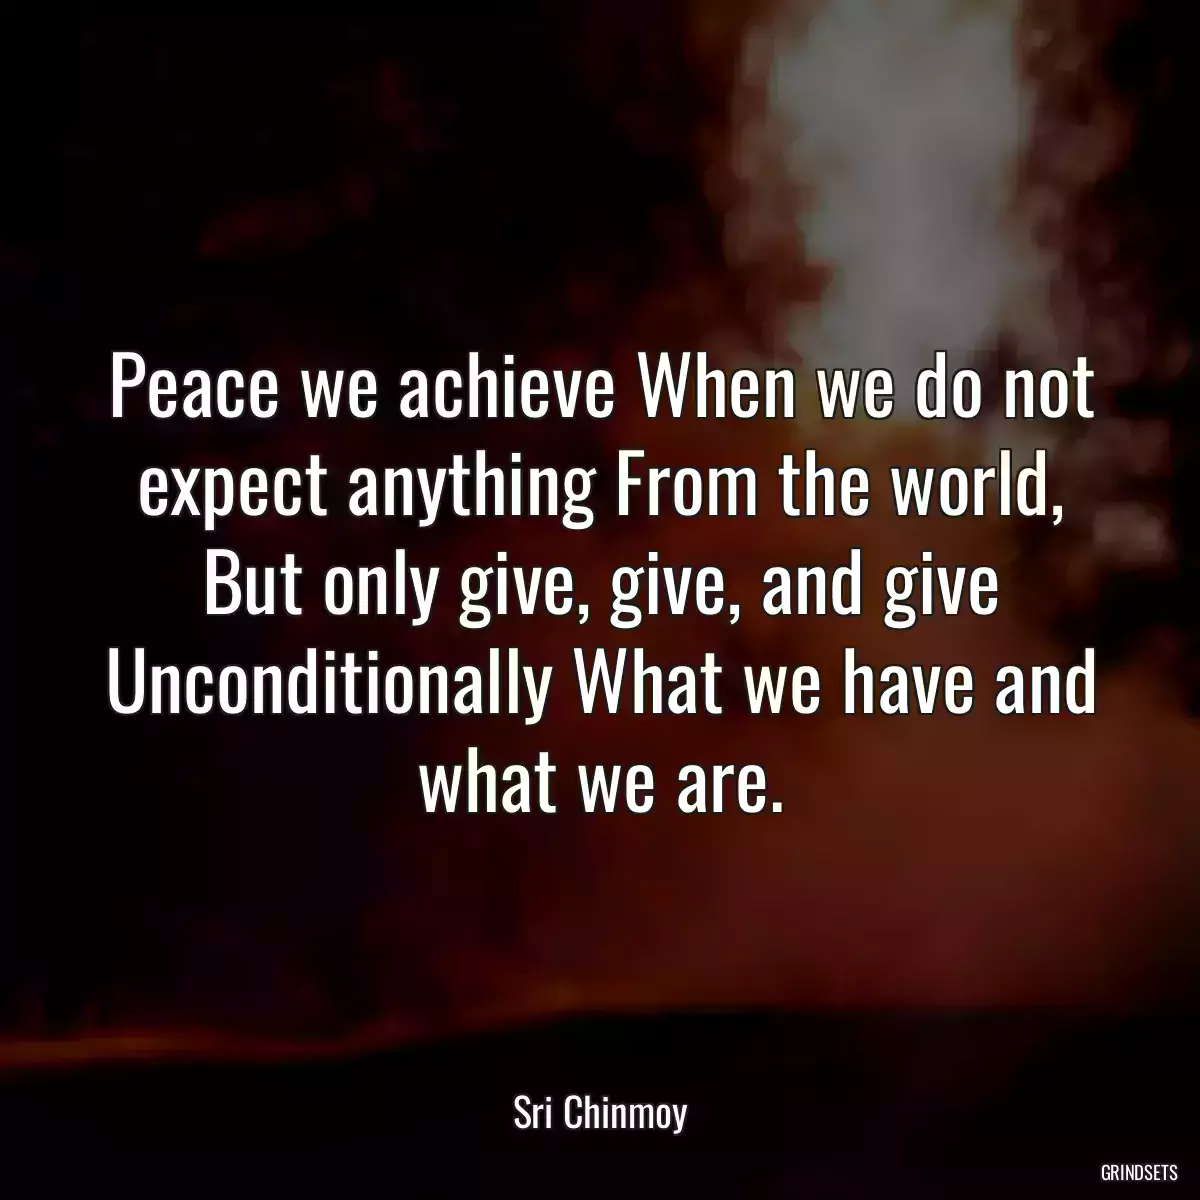 Peace we achieve When we do not expect anything From the world, But only give, give, and give Unconditionally What we have and what we are.